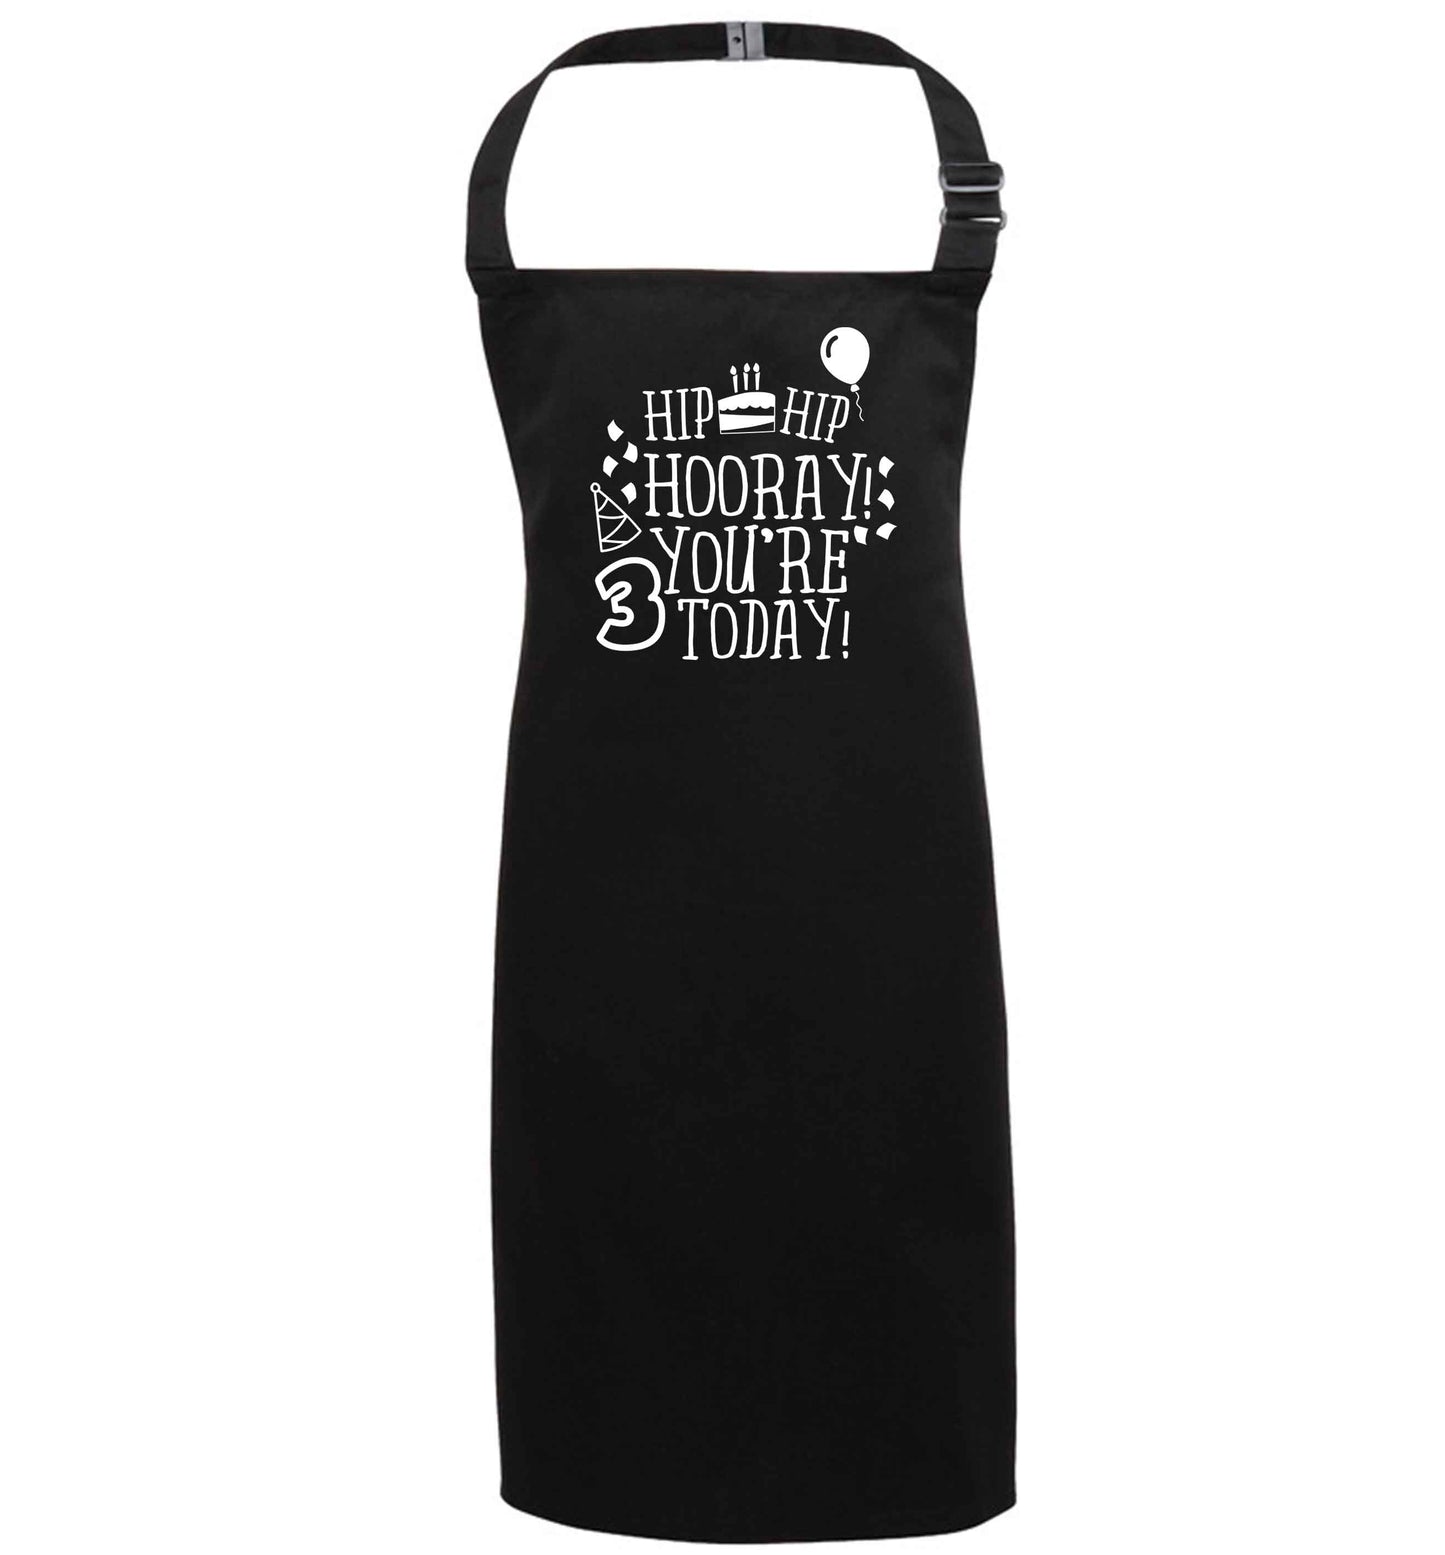 You're 3 Todayblack apron 7-10 years